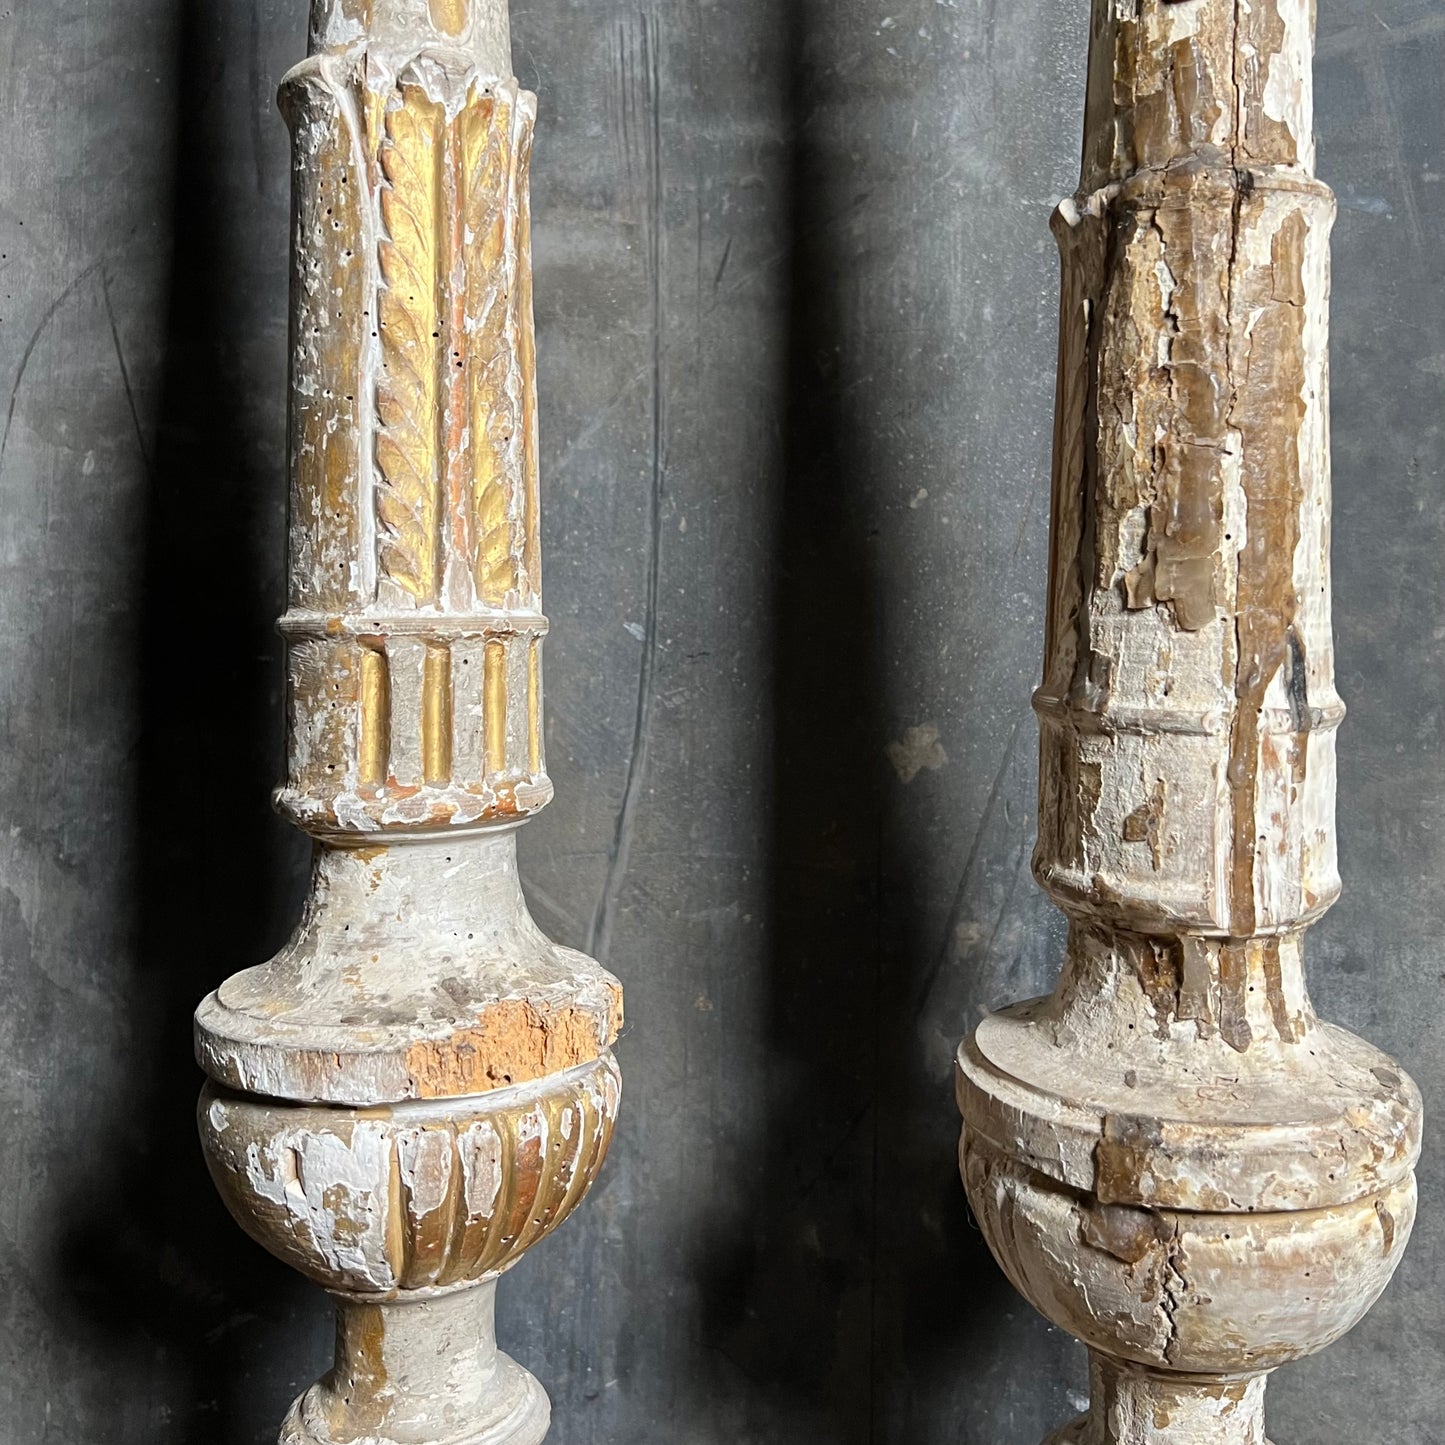 Pair of Tall Carved Painted Italian Altar Candlesticks Late 17th/Early 18th Century